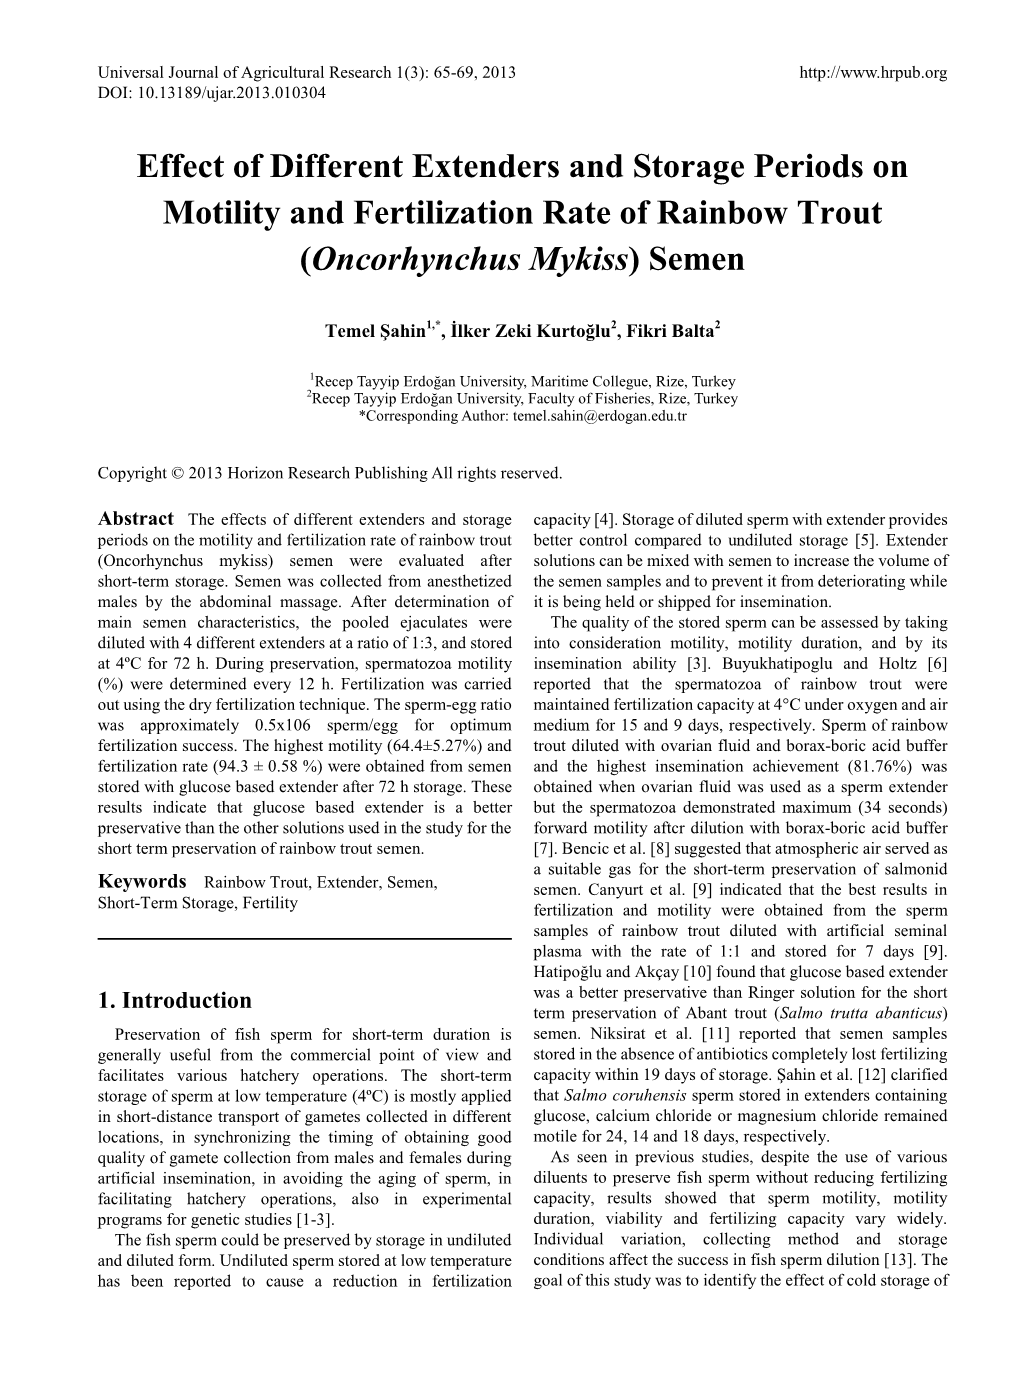 Effect of Different Extenders and Storage Periods on Motility and Fertilization Rate of Rainbow Trout (Oncorhynchus Mykiss) Semen